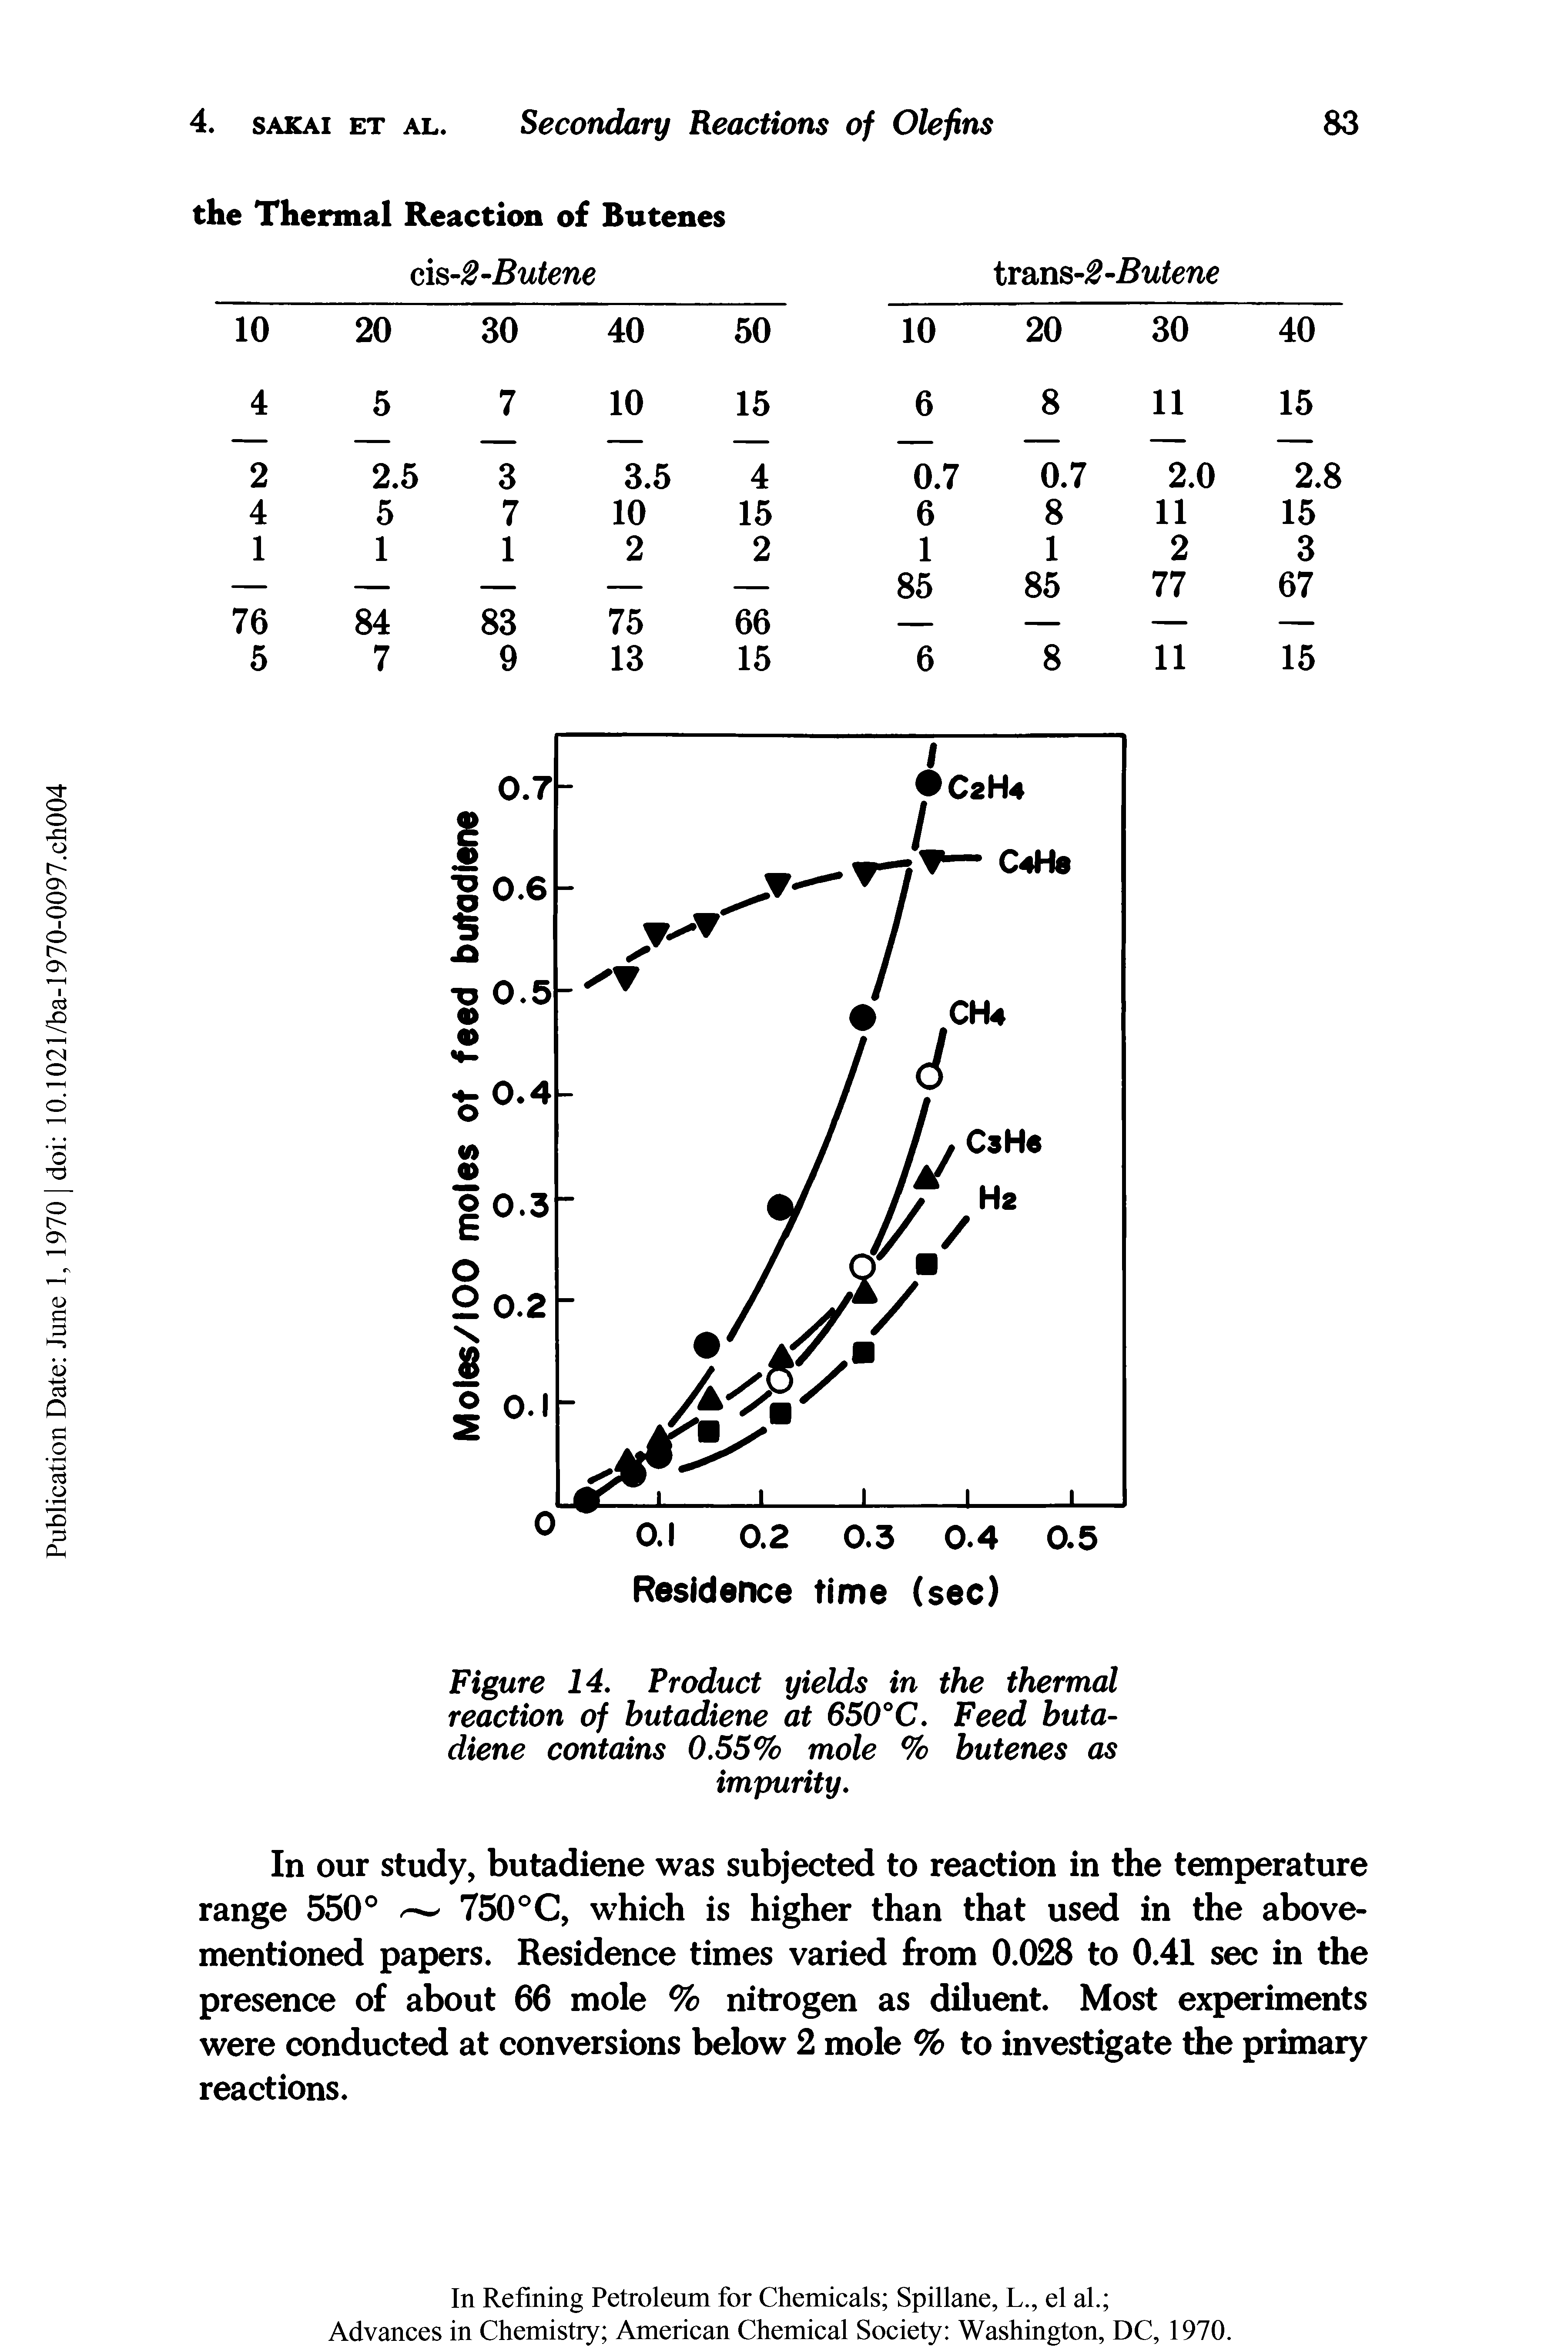 Figure 14. Product yields in the thermal reaction of butadiene at 650°C. Feed butadiene contains 0.55% mole % butenes as impurity.